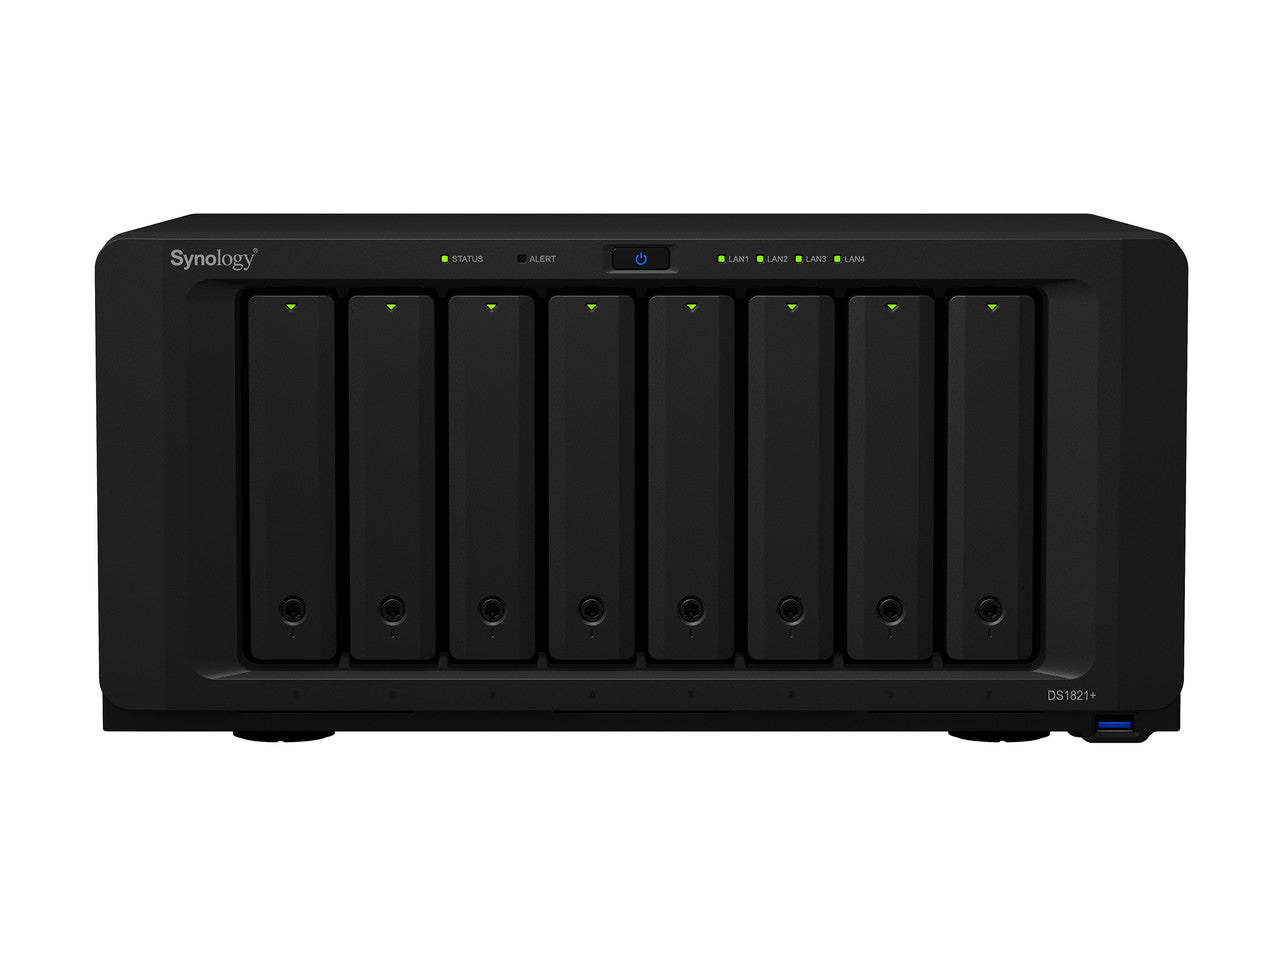 Synology DS1821+ 8-BAY DiskStation with 32GB RAM, 1.6TB (2x800GB) Cache, E10G21-F2 SFP+ 10Gb Adapter and 96TB (8 x 12TB) of Synology Enterprise HAT5300 Drives Fully Assembled and Tested